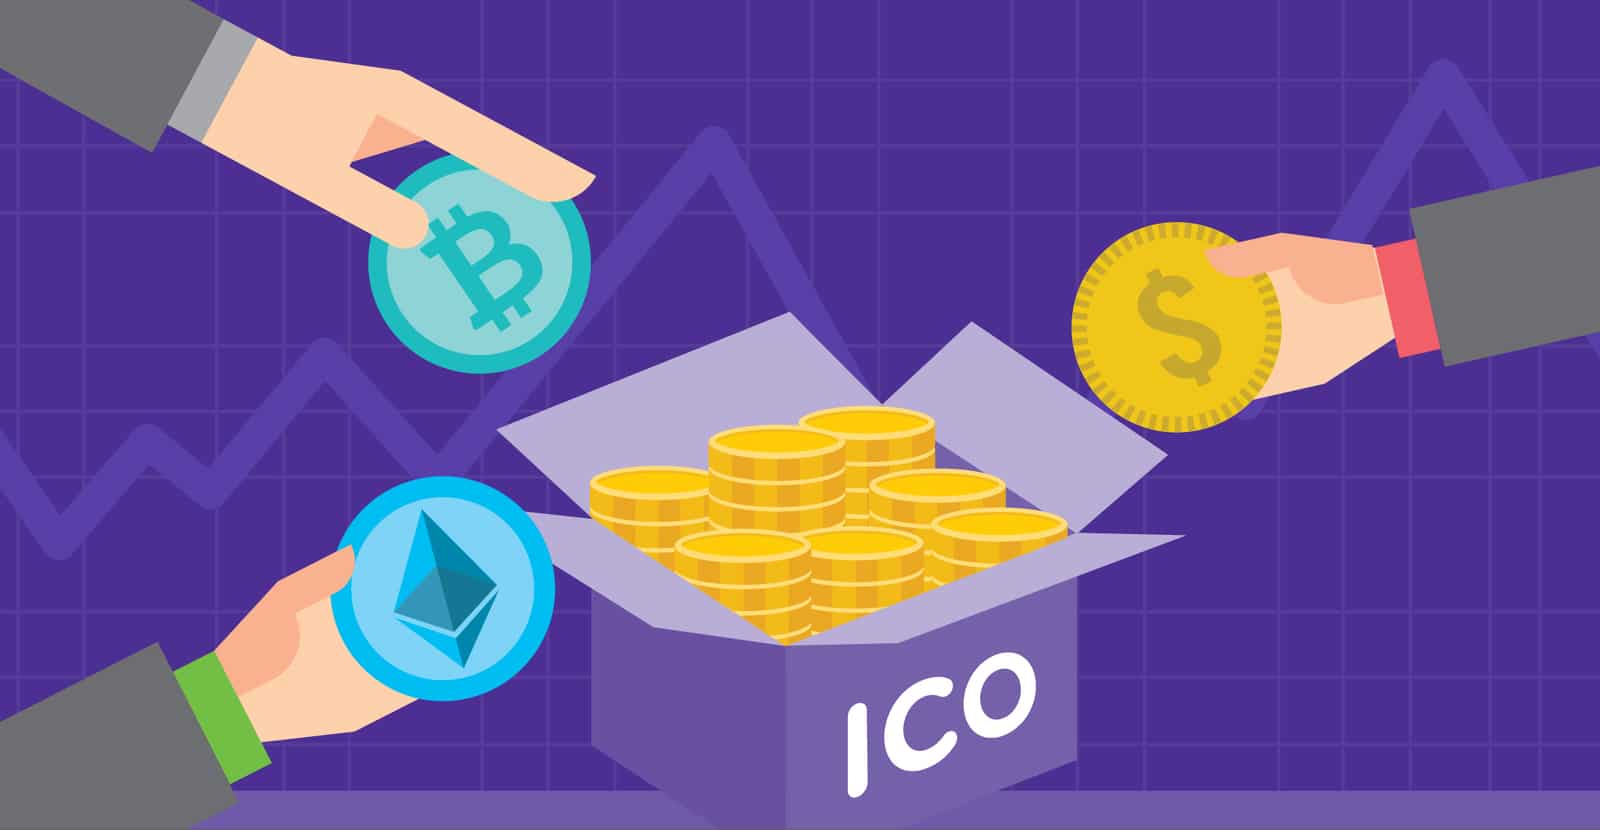 Tips for participating in ICOs